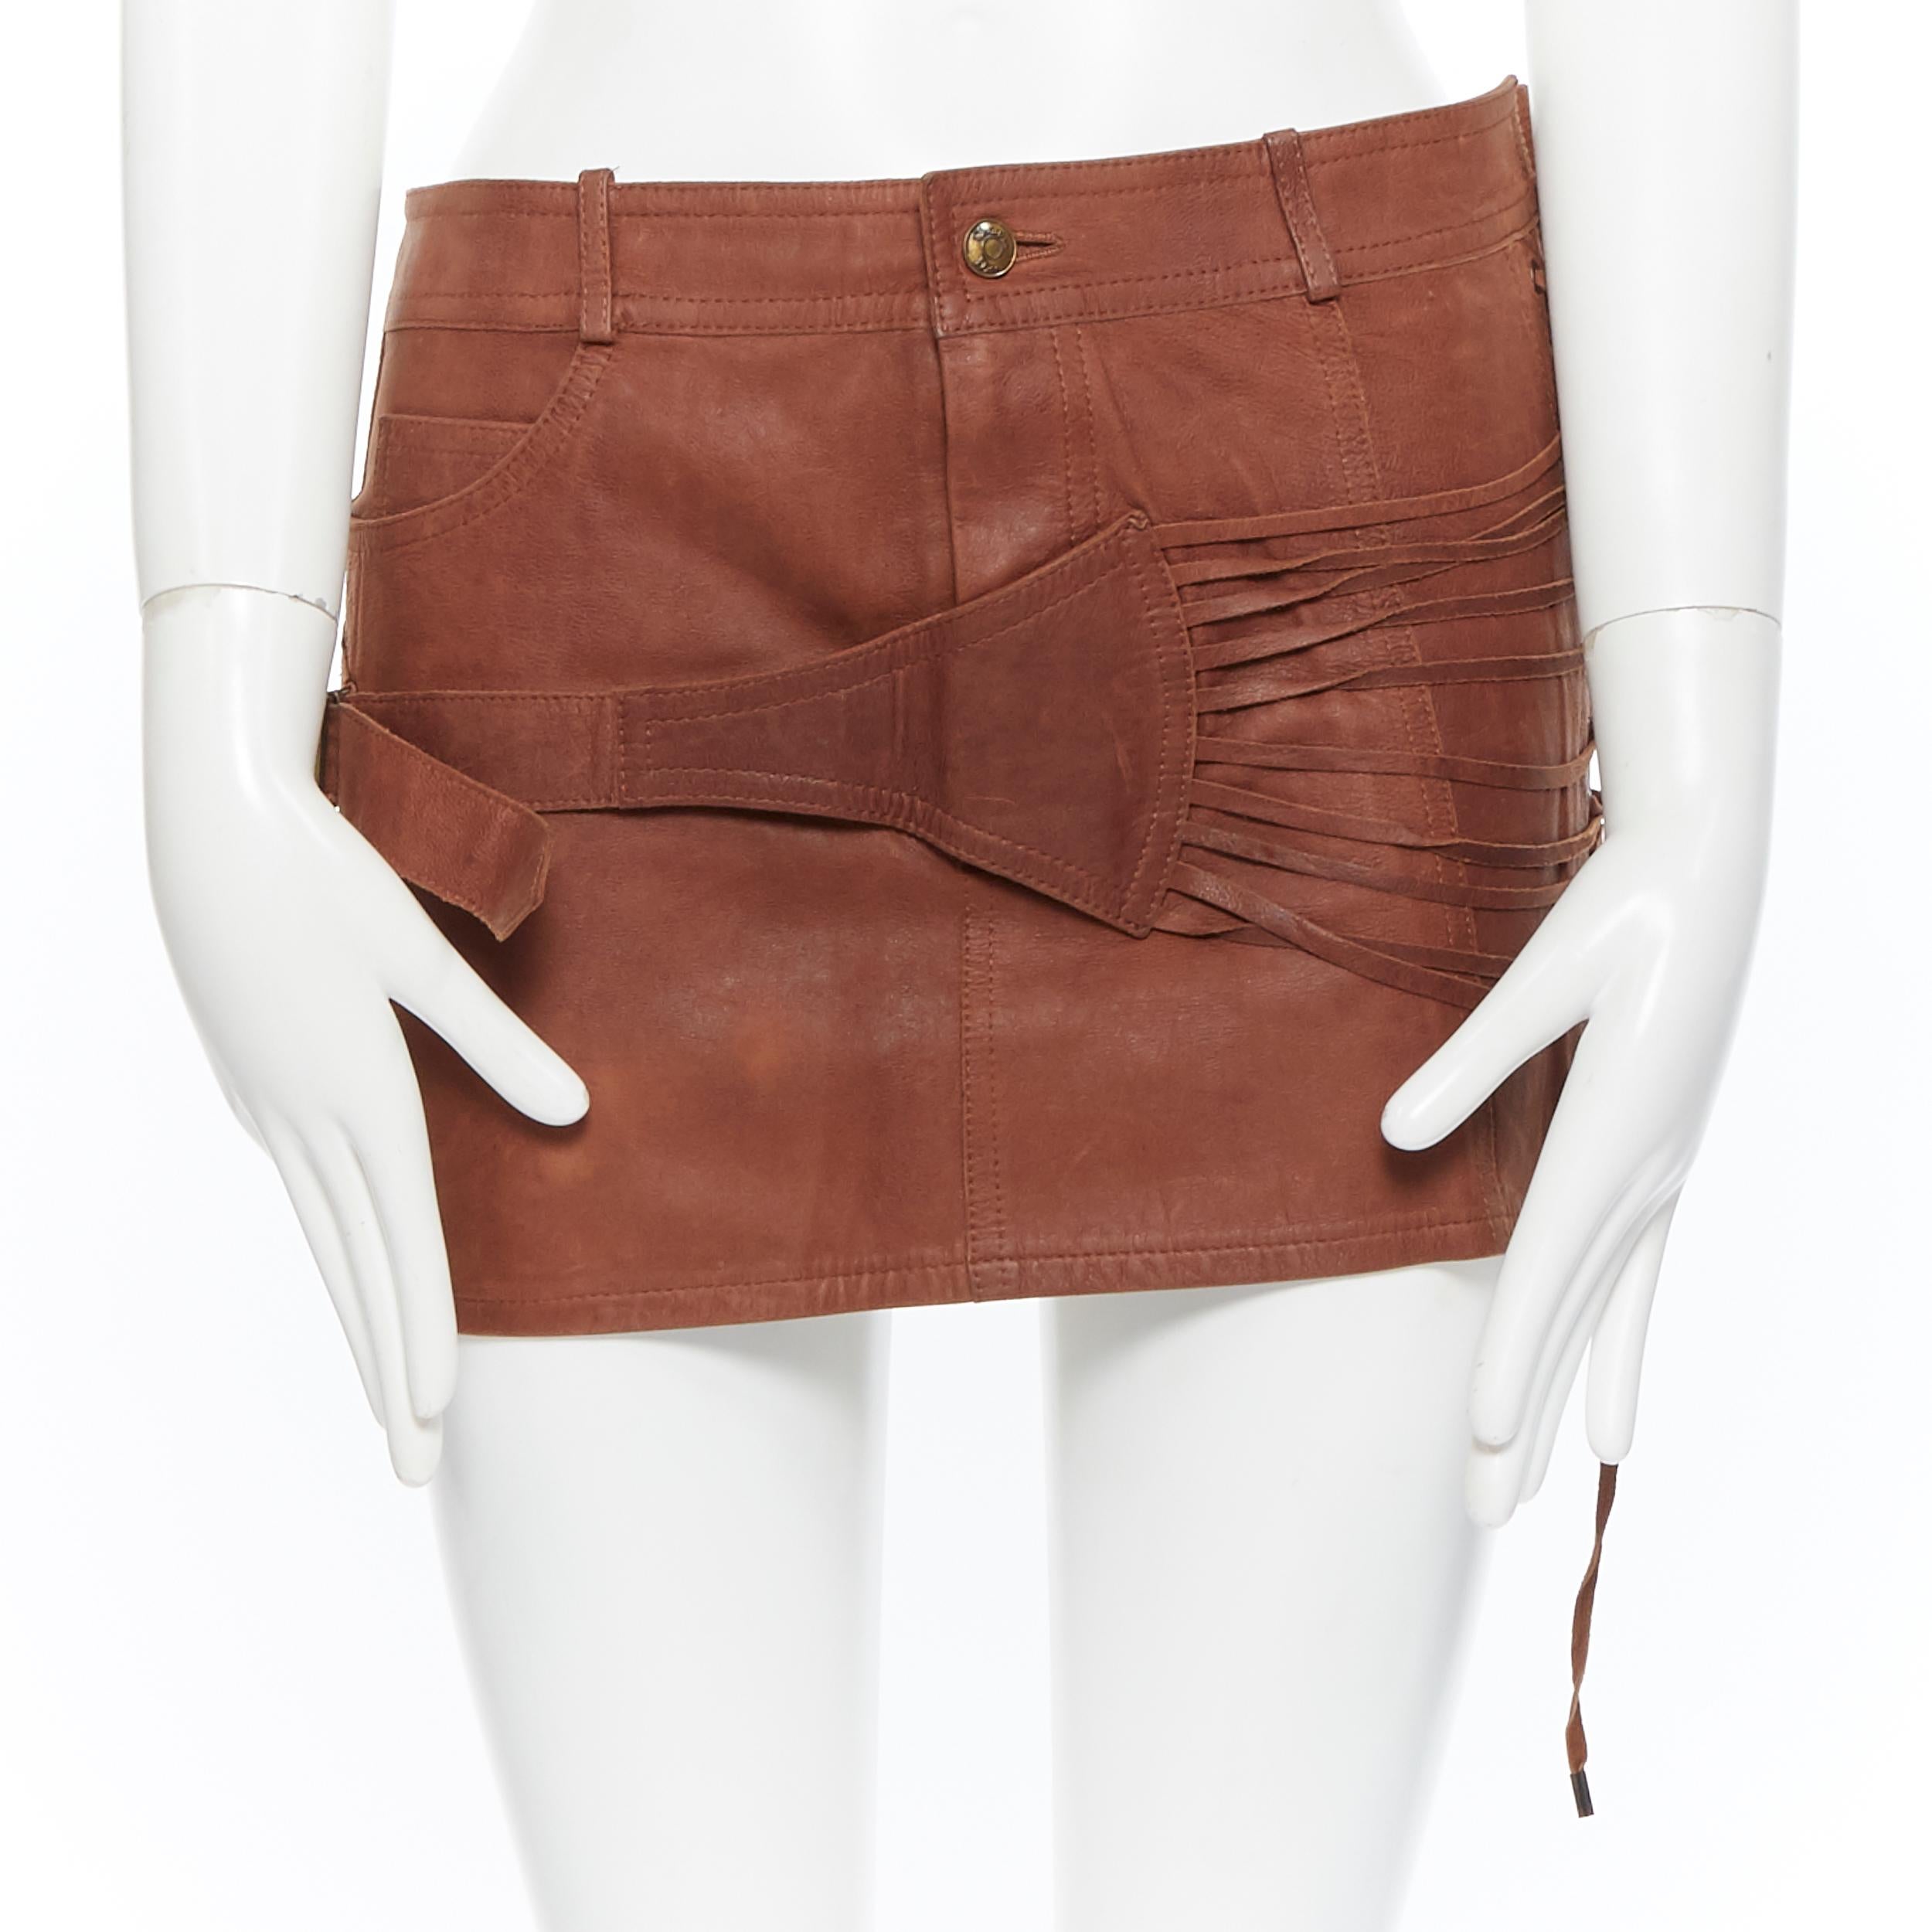 vintage CHRISTIAN DIOR Galliano brown leather strappy buckle mini skirt FR38
Brand: Christian Dior
Designer: John Galliano
Model Name / Style: Leather skirt
Material: Leather
Color: Brown
Pattern: Solid
Closure: Button
Extra Detail: Low rise.
Made